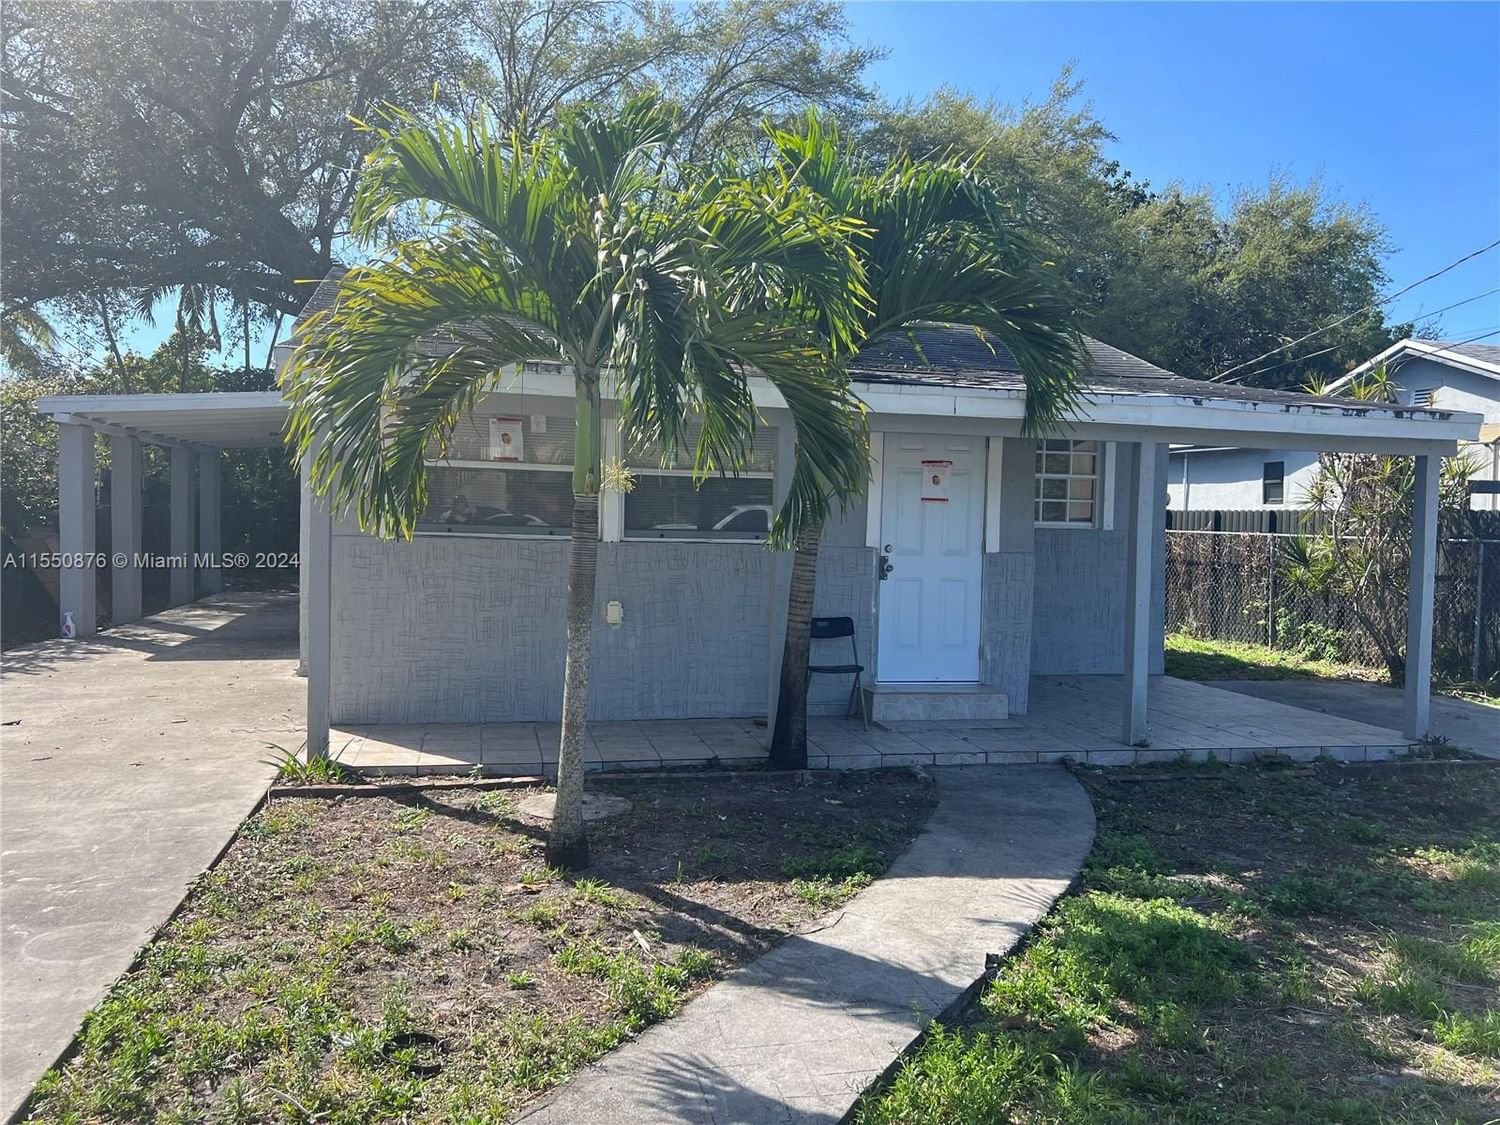 Real estate property located at 412 95th St, Miami-Dade County, PINEWOOD PARK PL AMD 2ND, Miami, FL